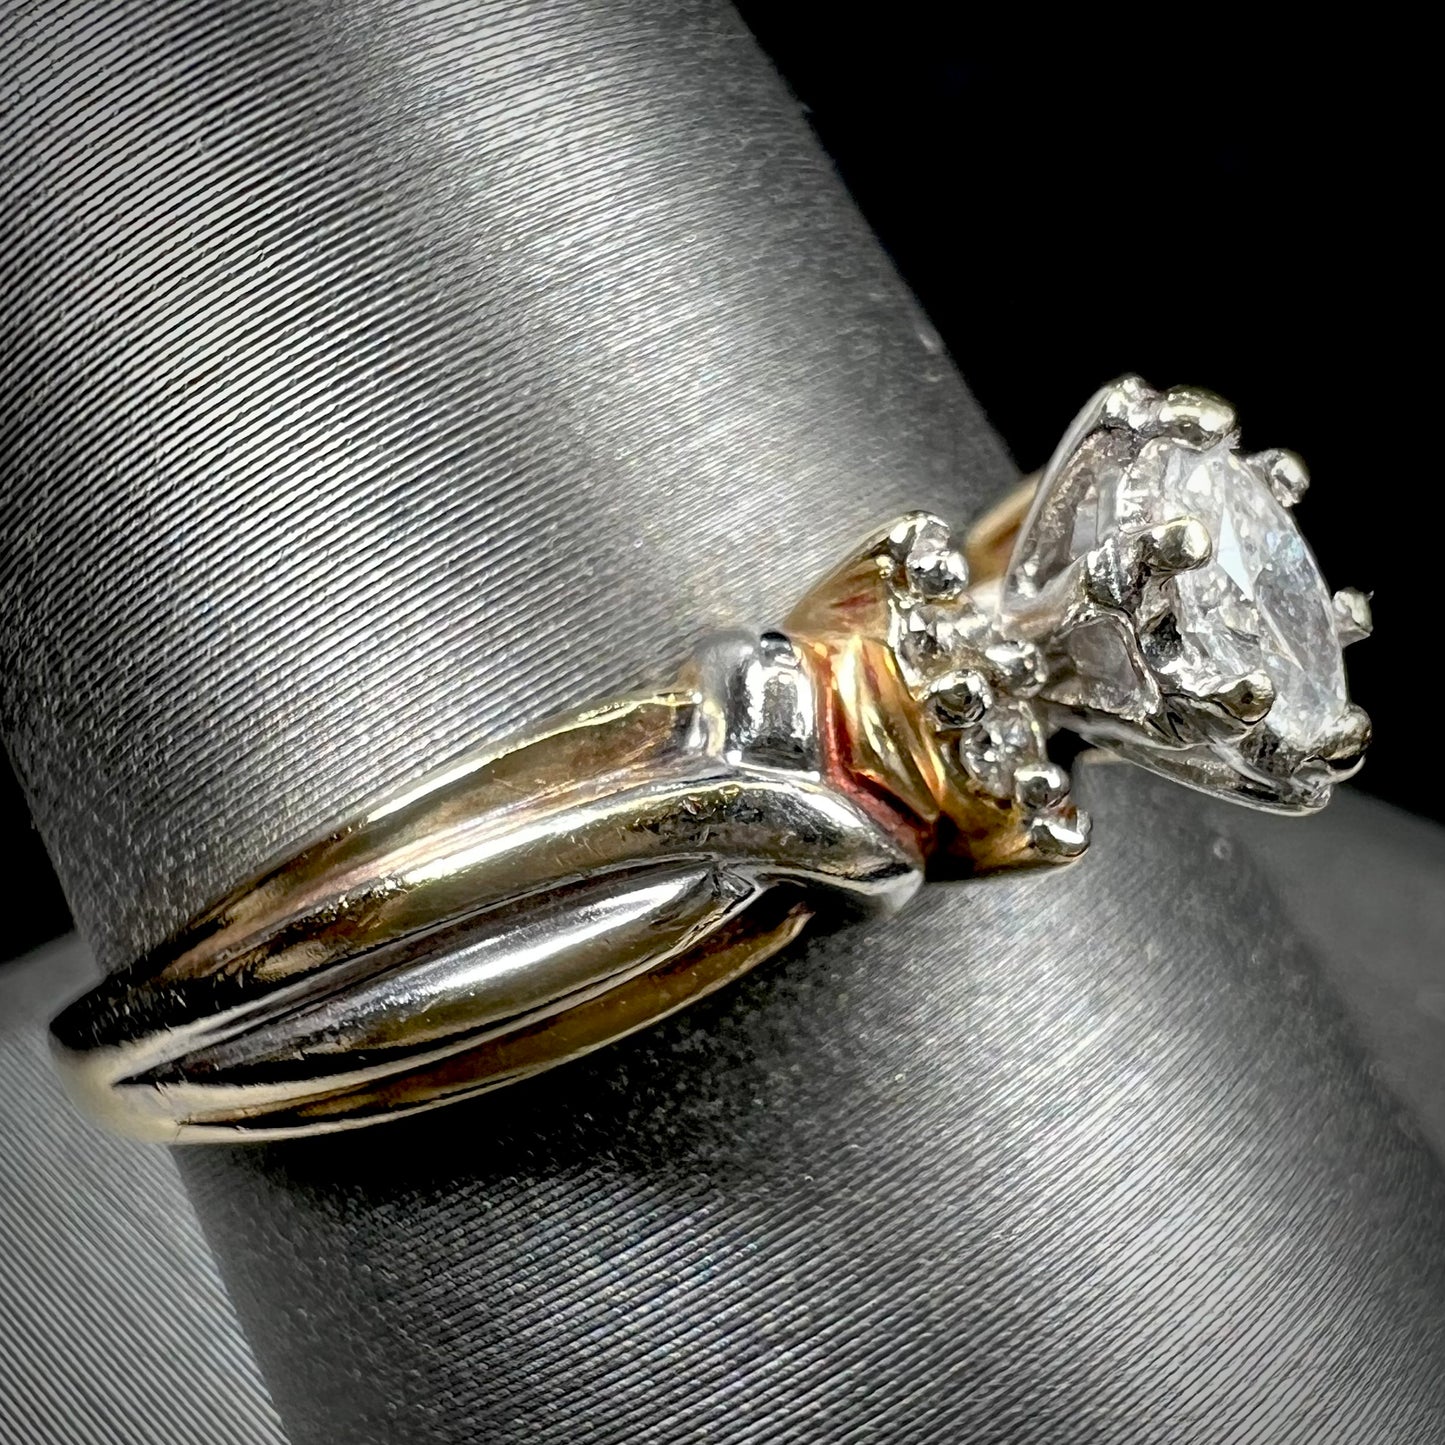 A ladies' two-tone white and yellow gold marquise cut diamond enagagement ring.  There are round diamond accents.